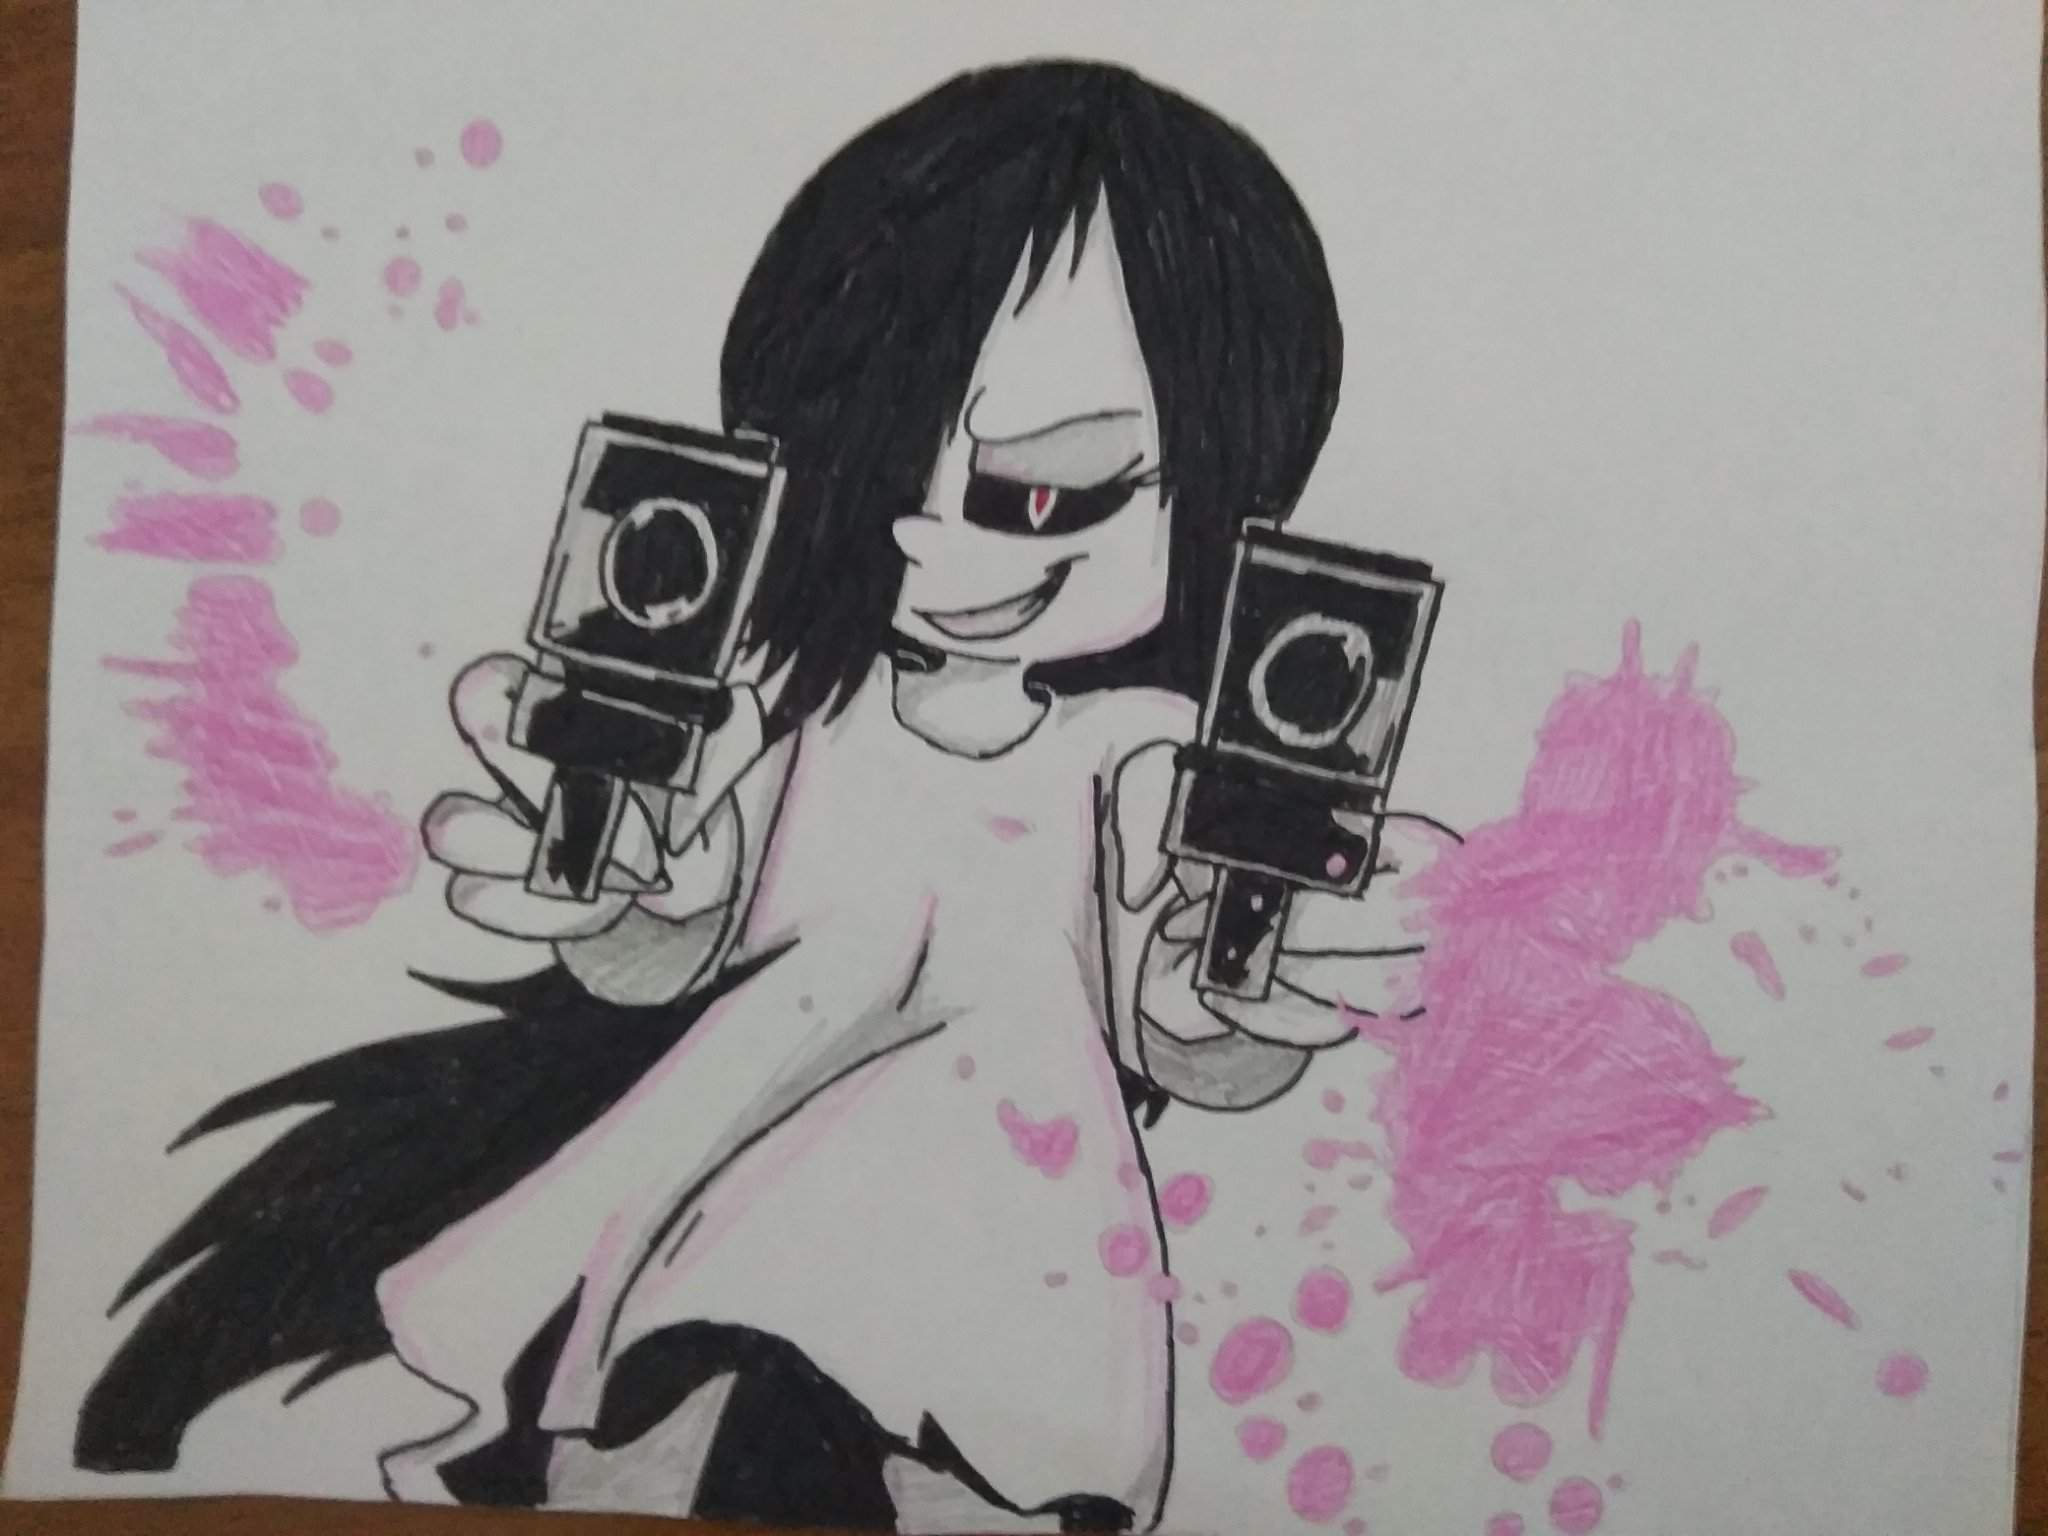 Erma: Here it is time for your end Erma Amino.